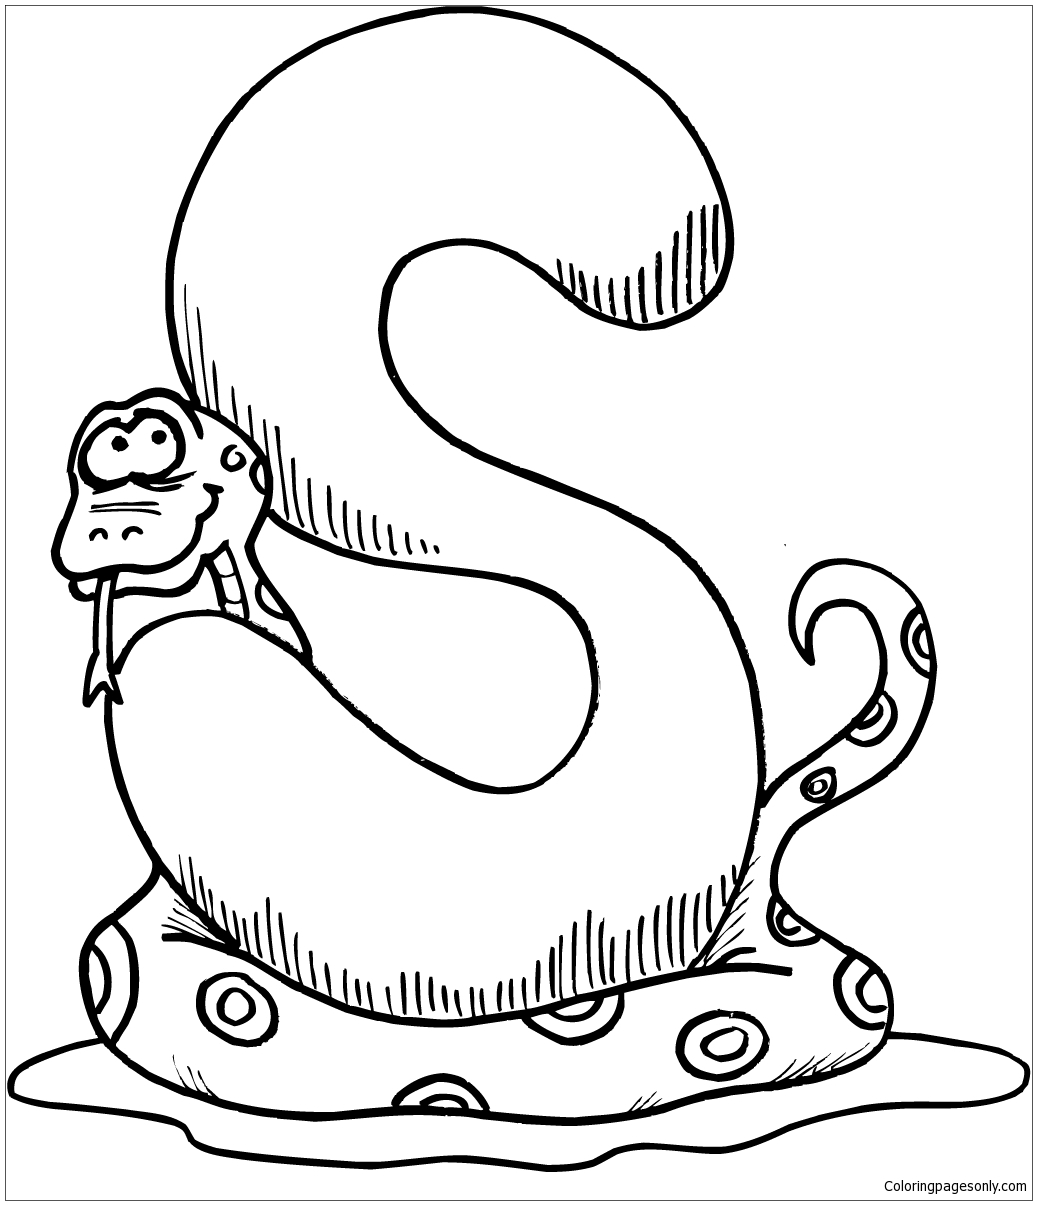 alphabet-letter-s-coloring-page-free-printable-coloring-pages